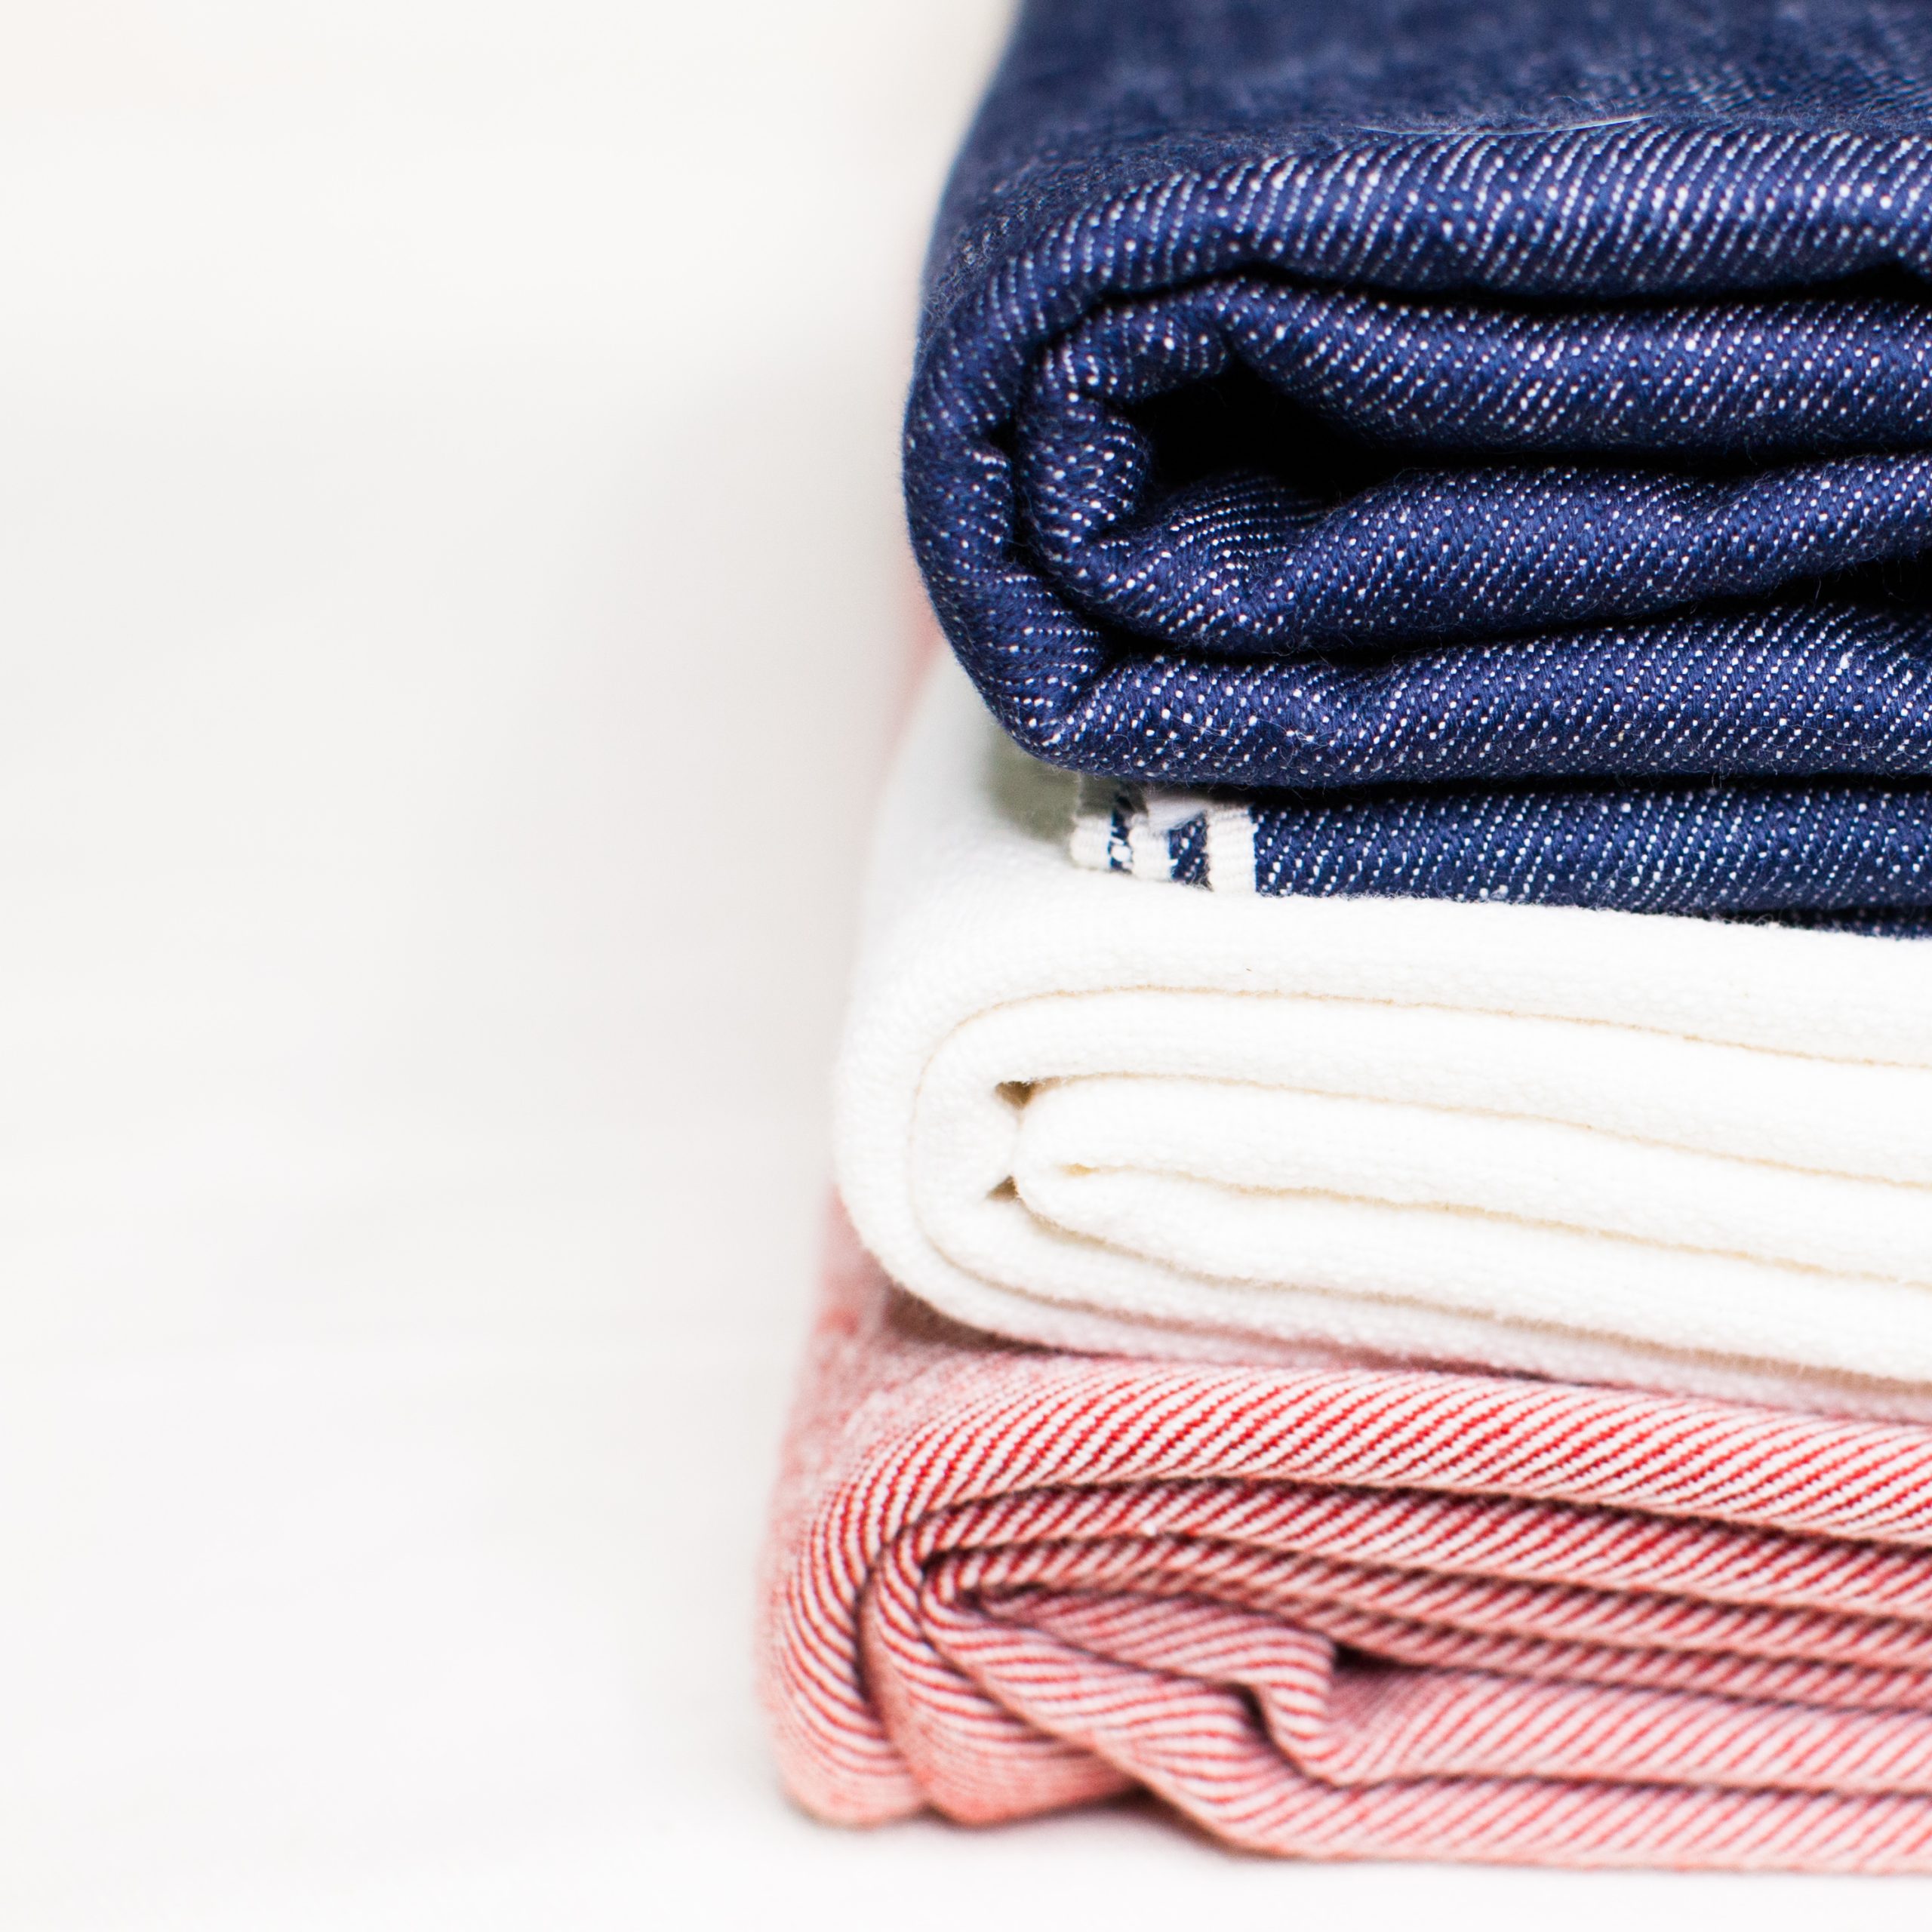 color-photograph-of-blue-white-red-selvedge-woven-textiles-stacked